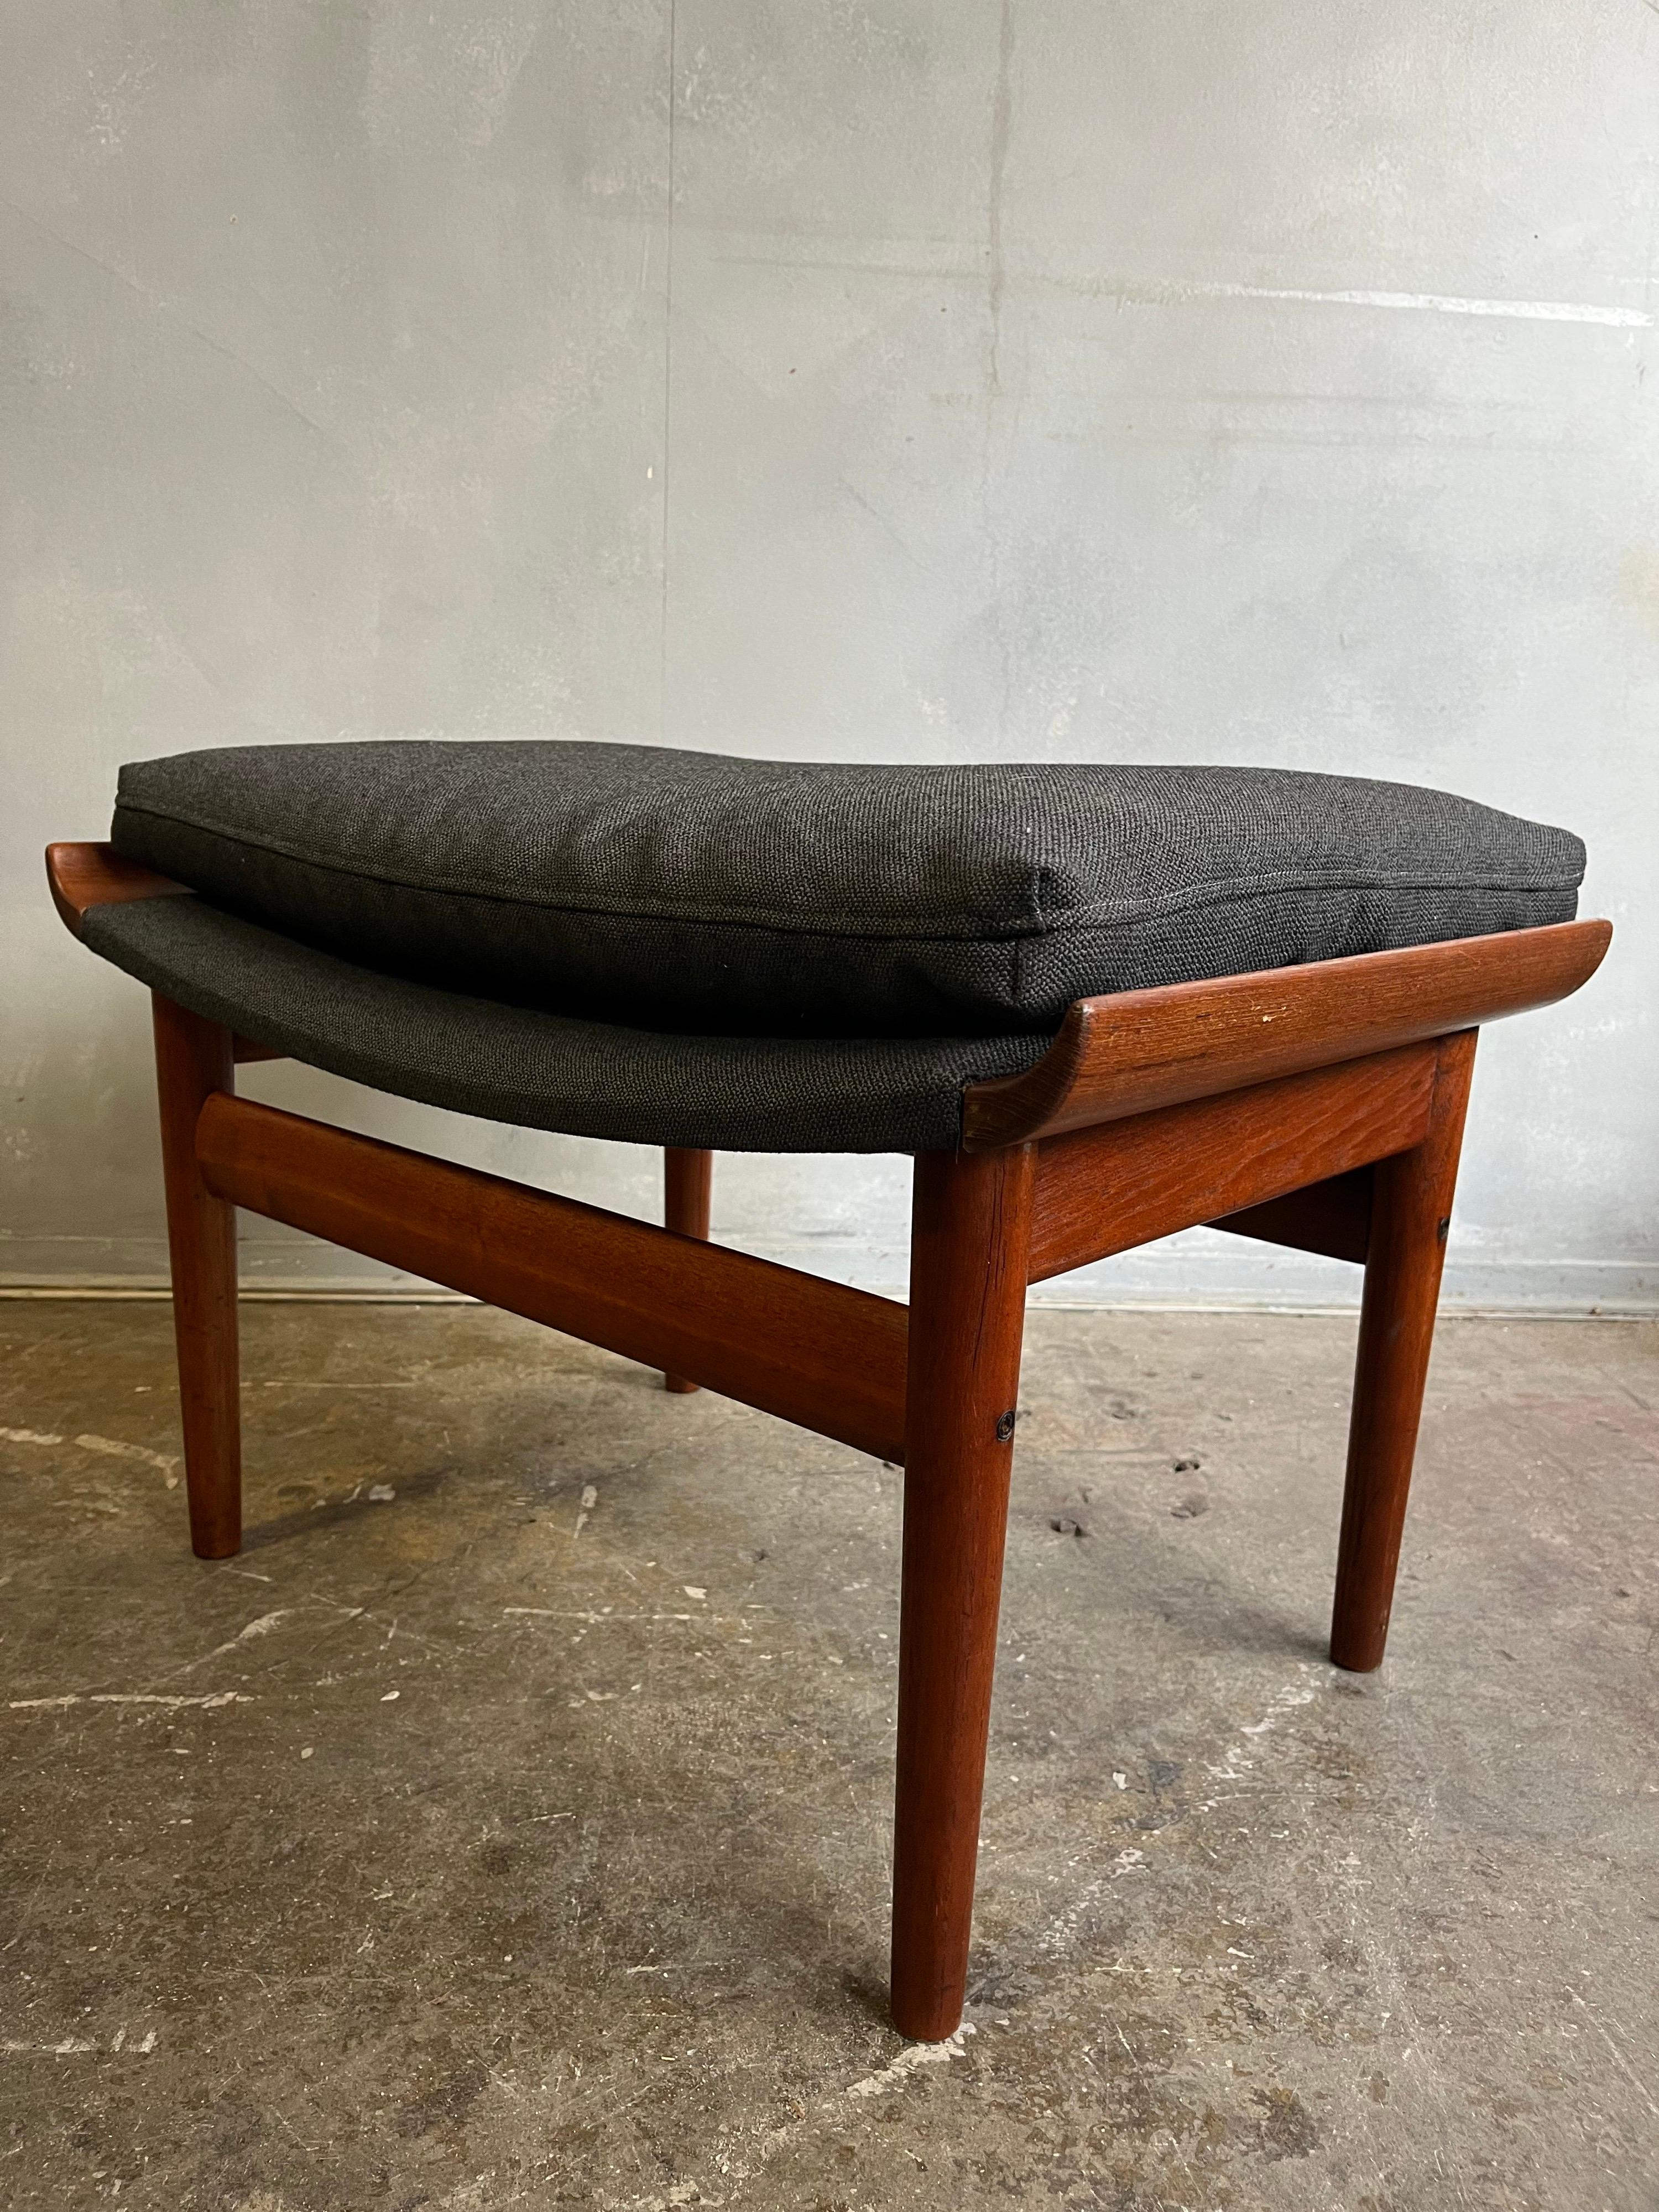 For your consideration is this bwana teak wood stool or ottoman by Finn Juhl for France and Son. Has been recovered and ready for use.


Measures: 25 inches wide by 17 1/2 inches deep. 15 inches high not including the seat cushion which adds an